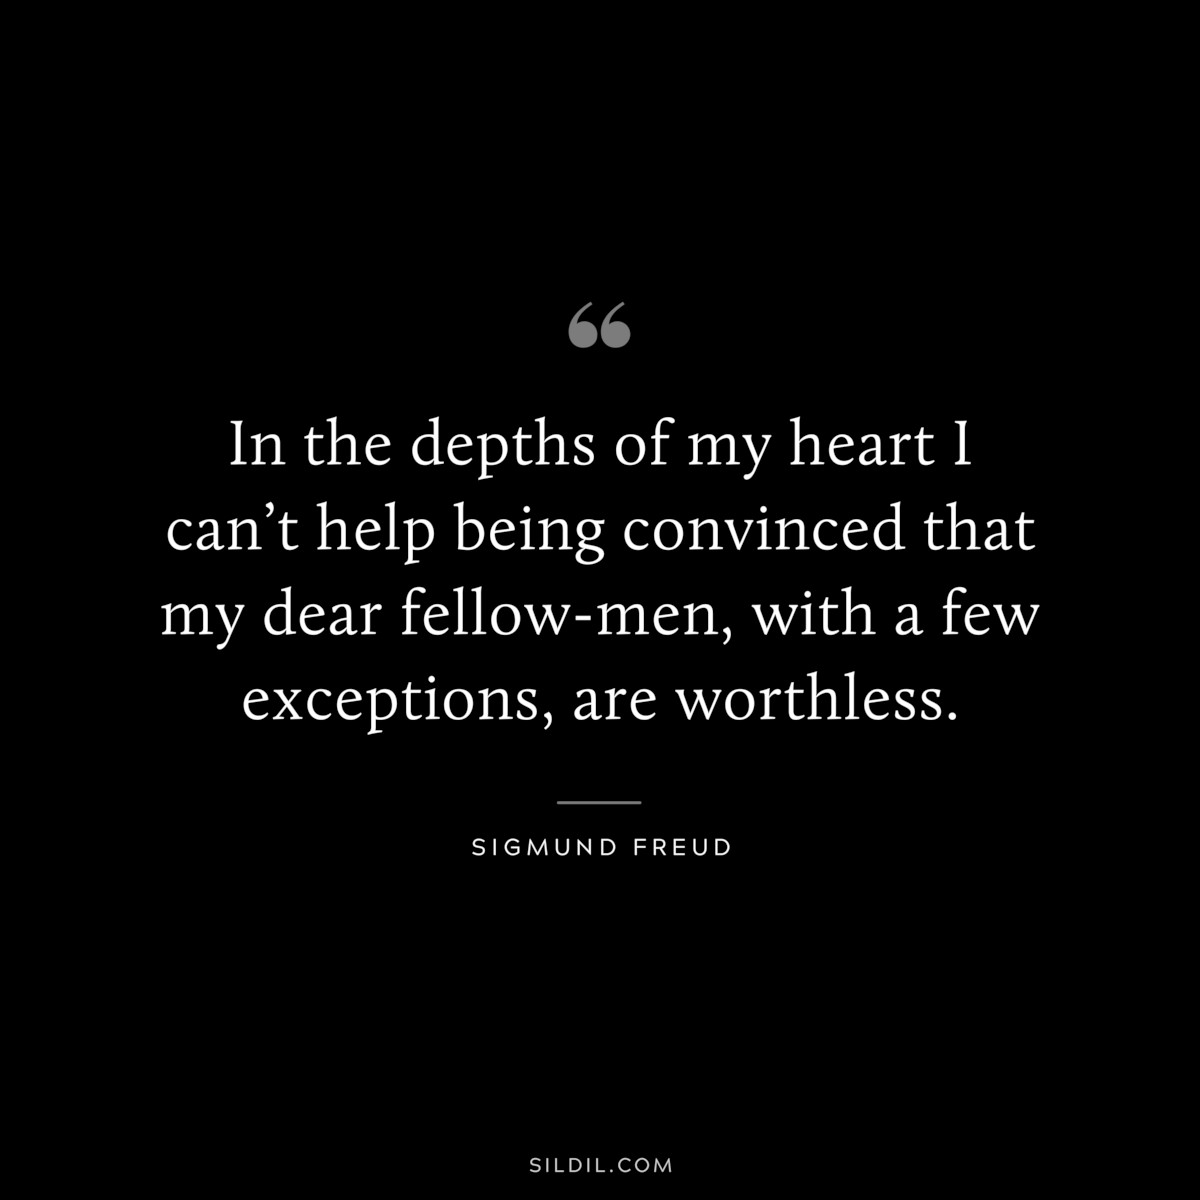 In the depths of my heart I can’t help being convinced that my dear fellow-men, with a few exceptions, are worthless. ― Sigmund Frued